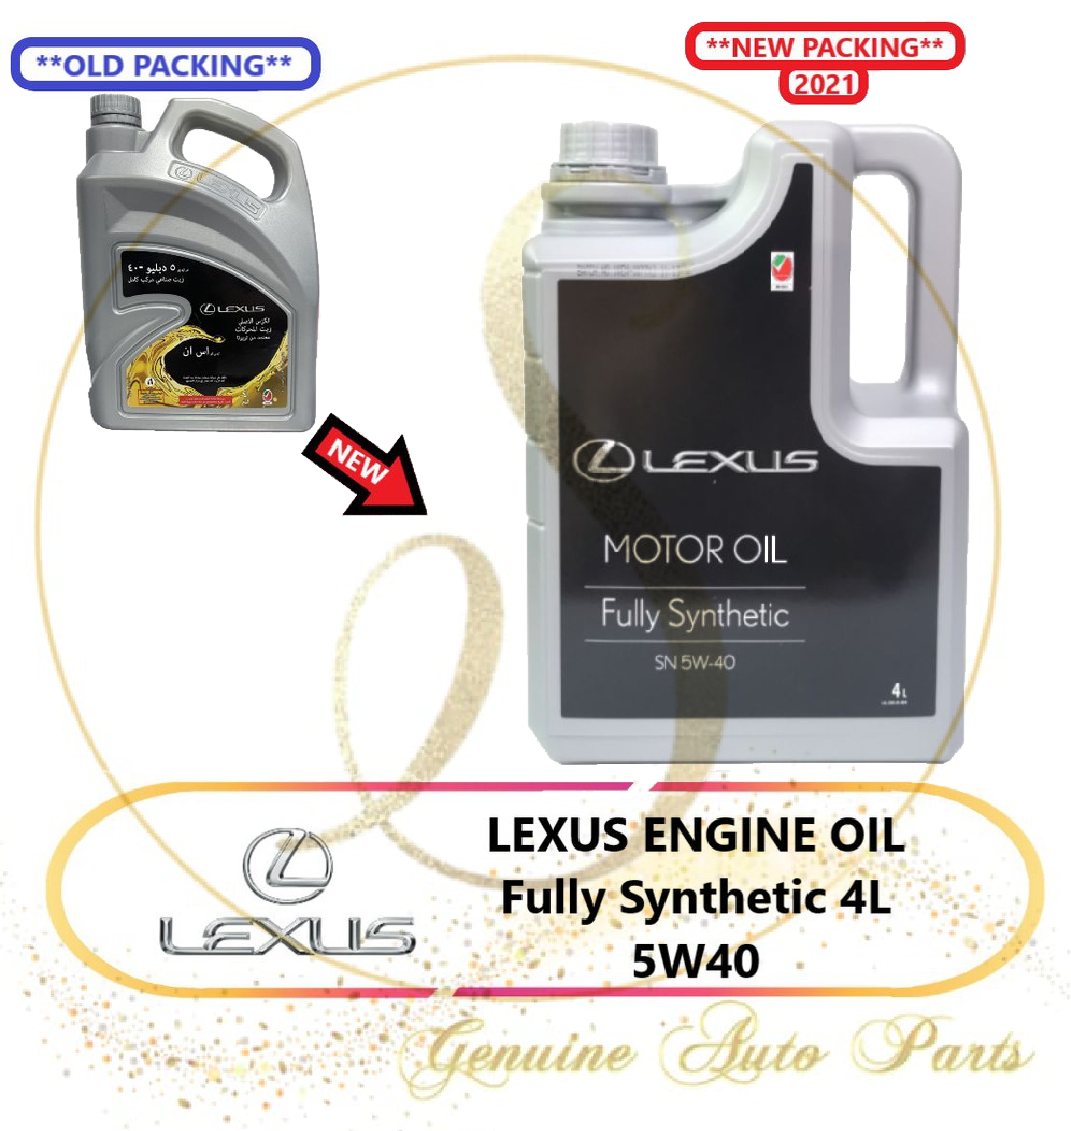 NEW PACKING 2021 Lexus 5W40 API-SP GF-6 Fully Synthetic Engine Oil 4L Toyota Motor Oil + Free Mileage Sticker